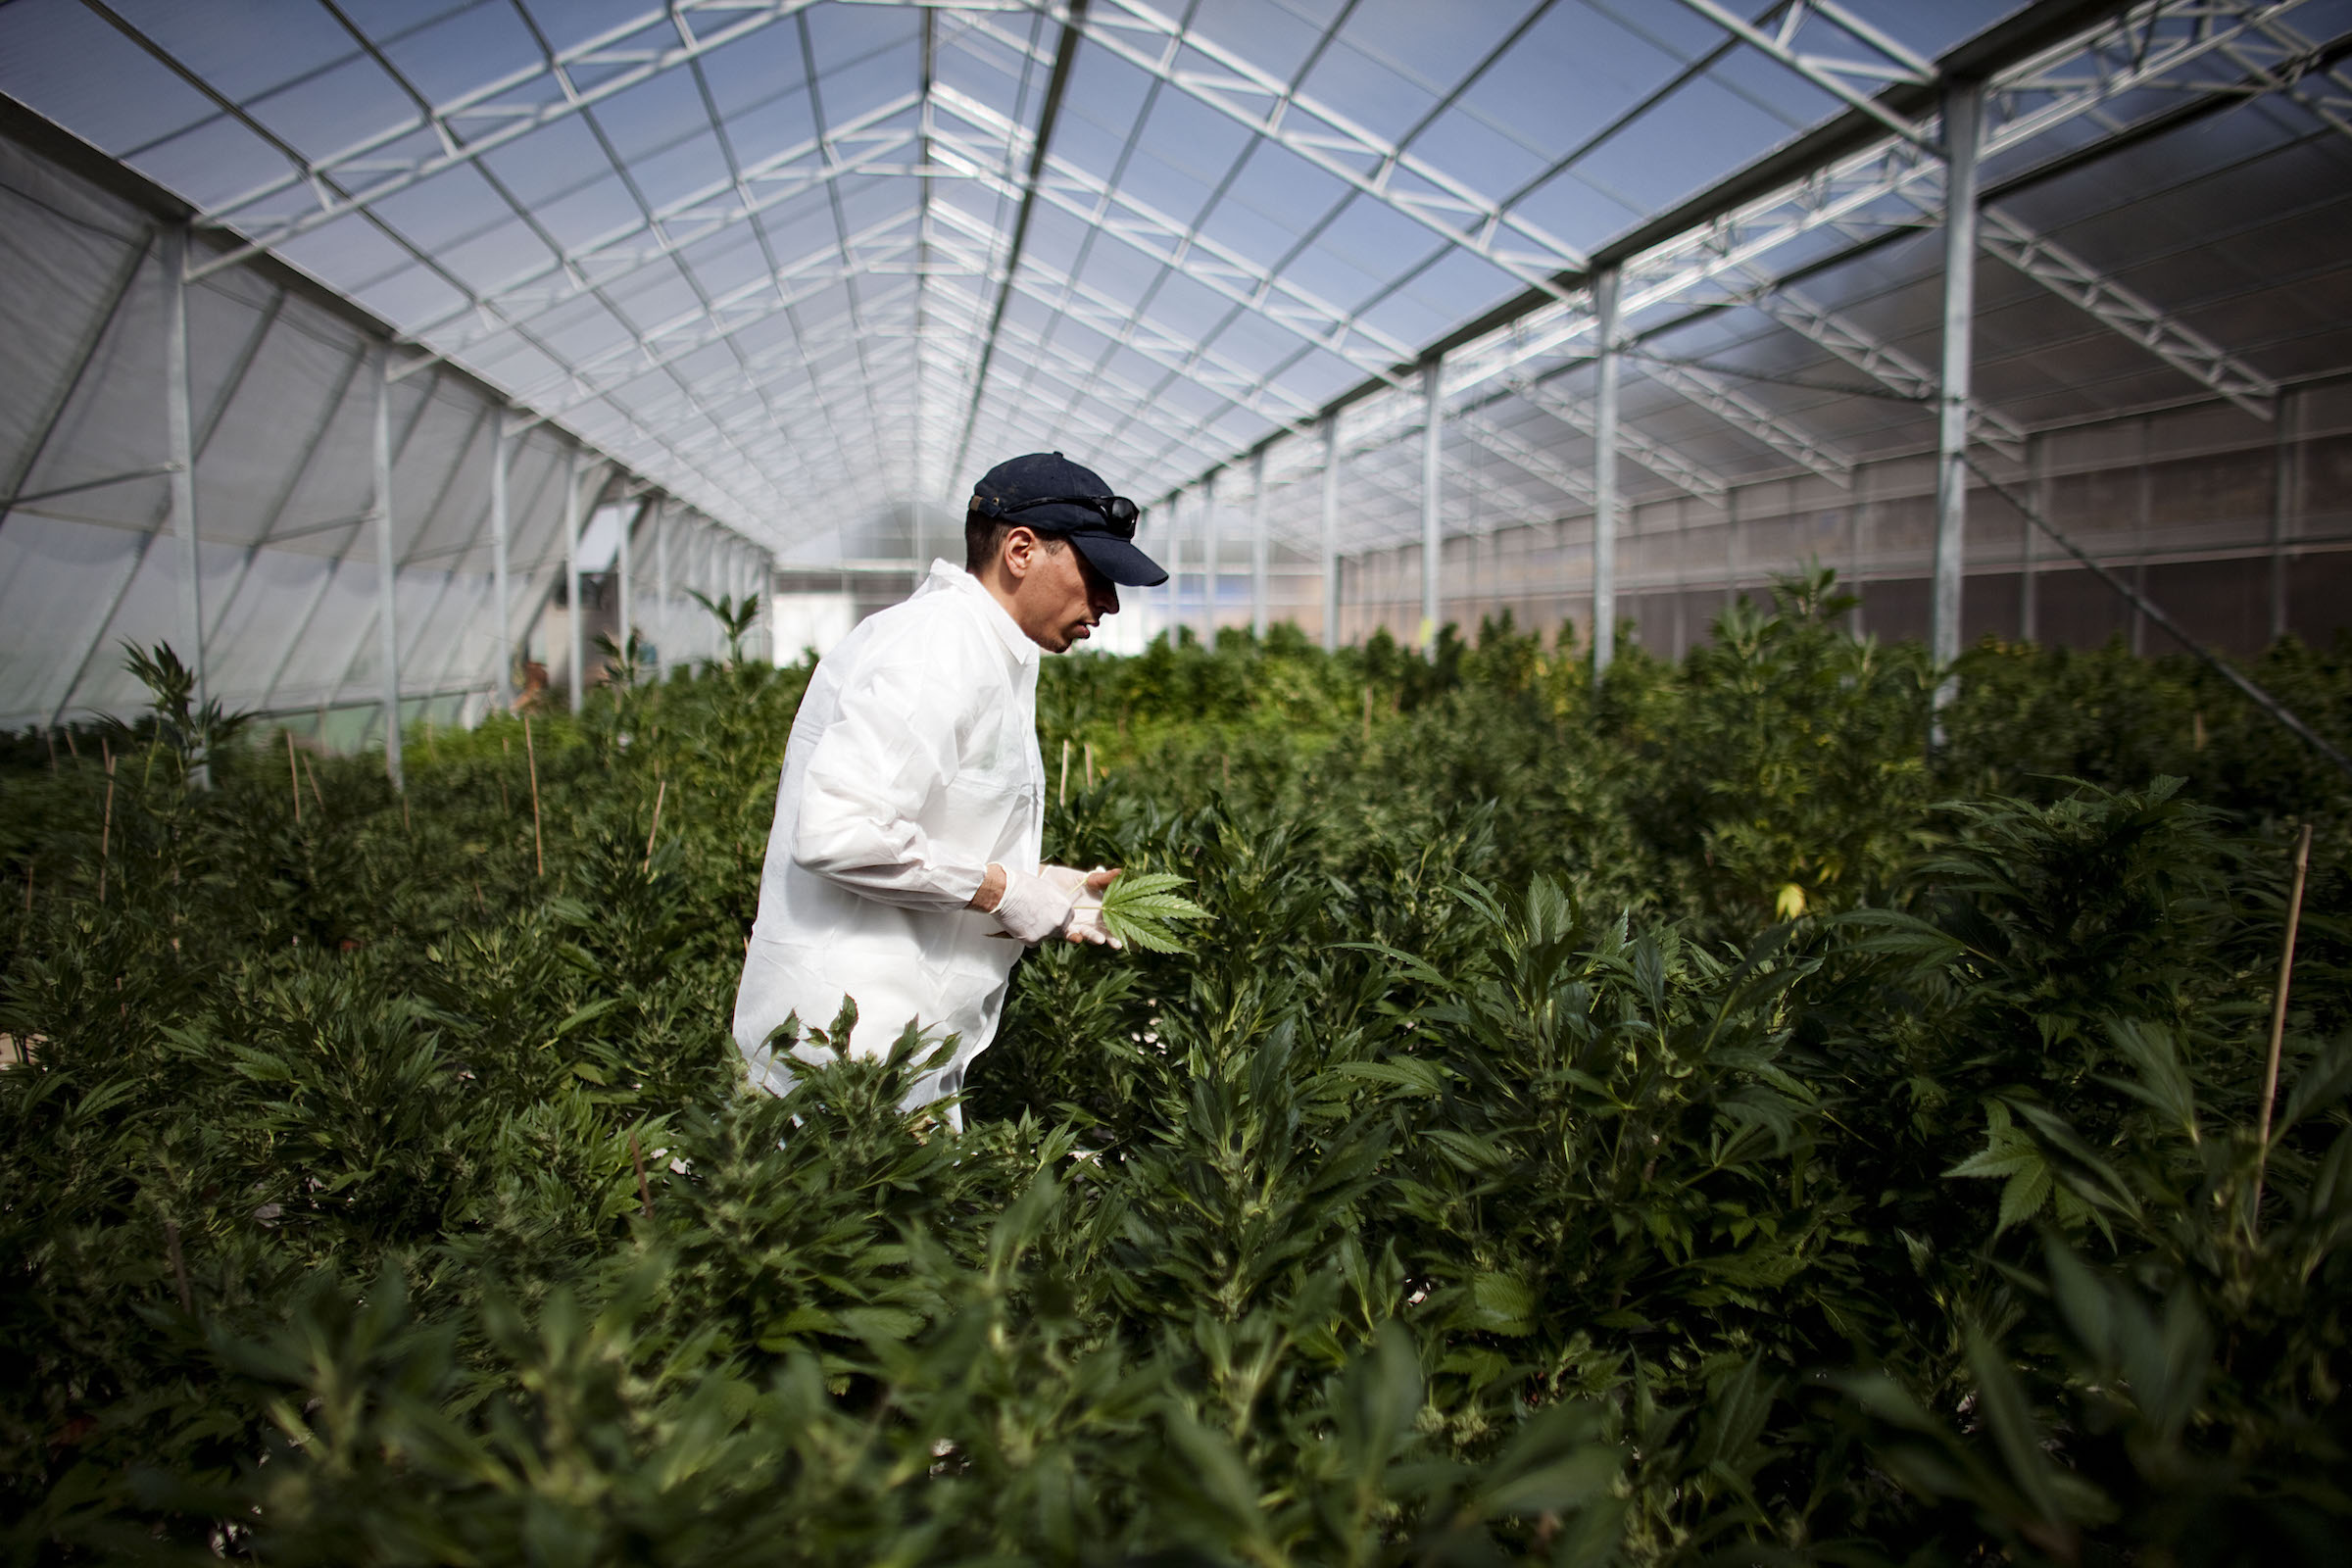 DELOITTE: Legal weed could be a $22.6 billion industry in Canada